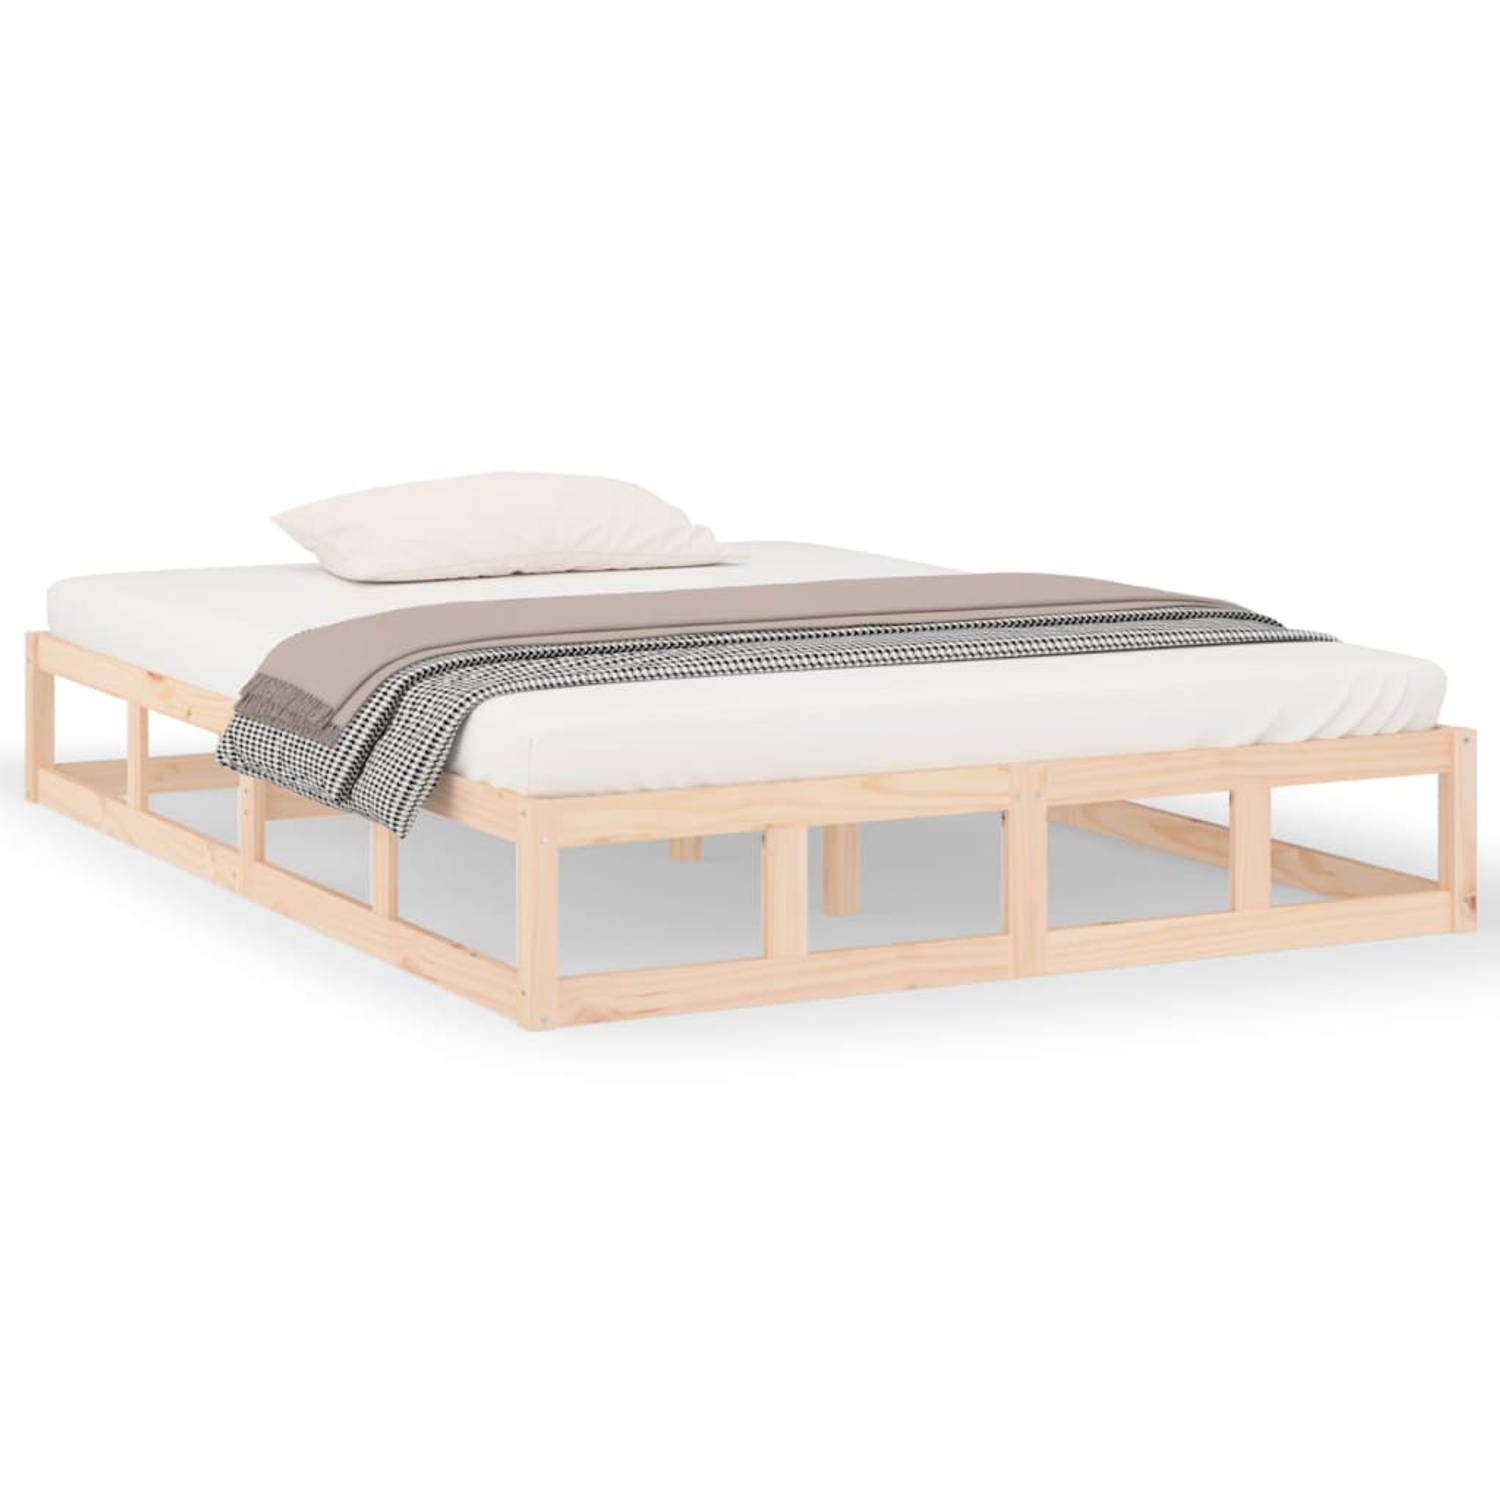 The Living Store Bedframe massief hout 160x200 cm - Bed